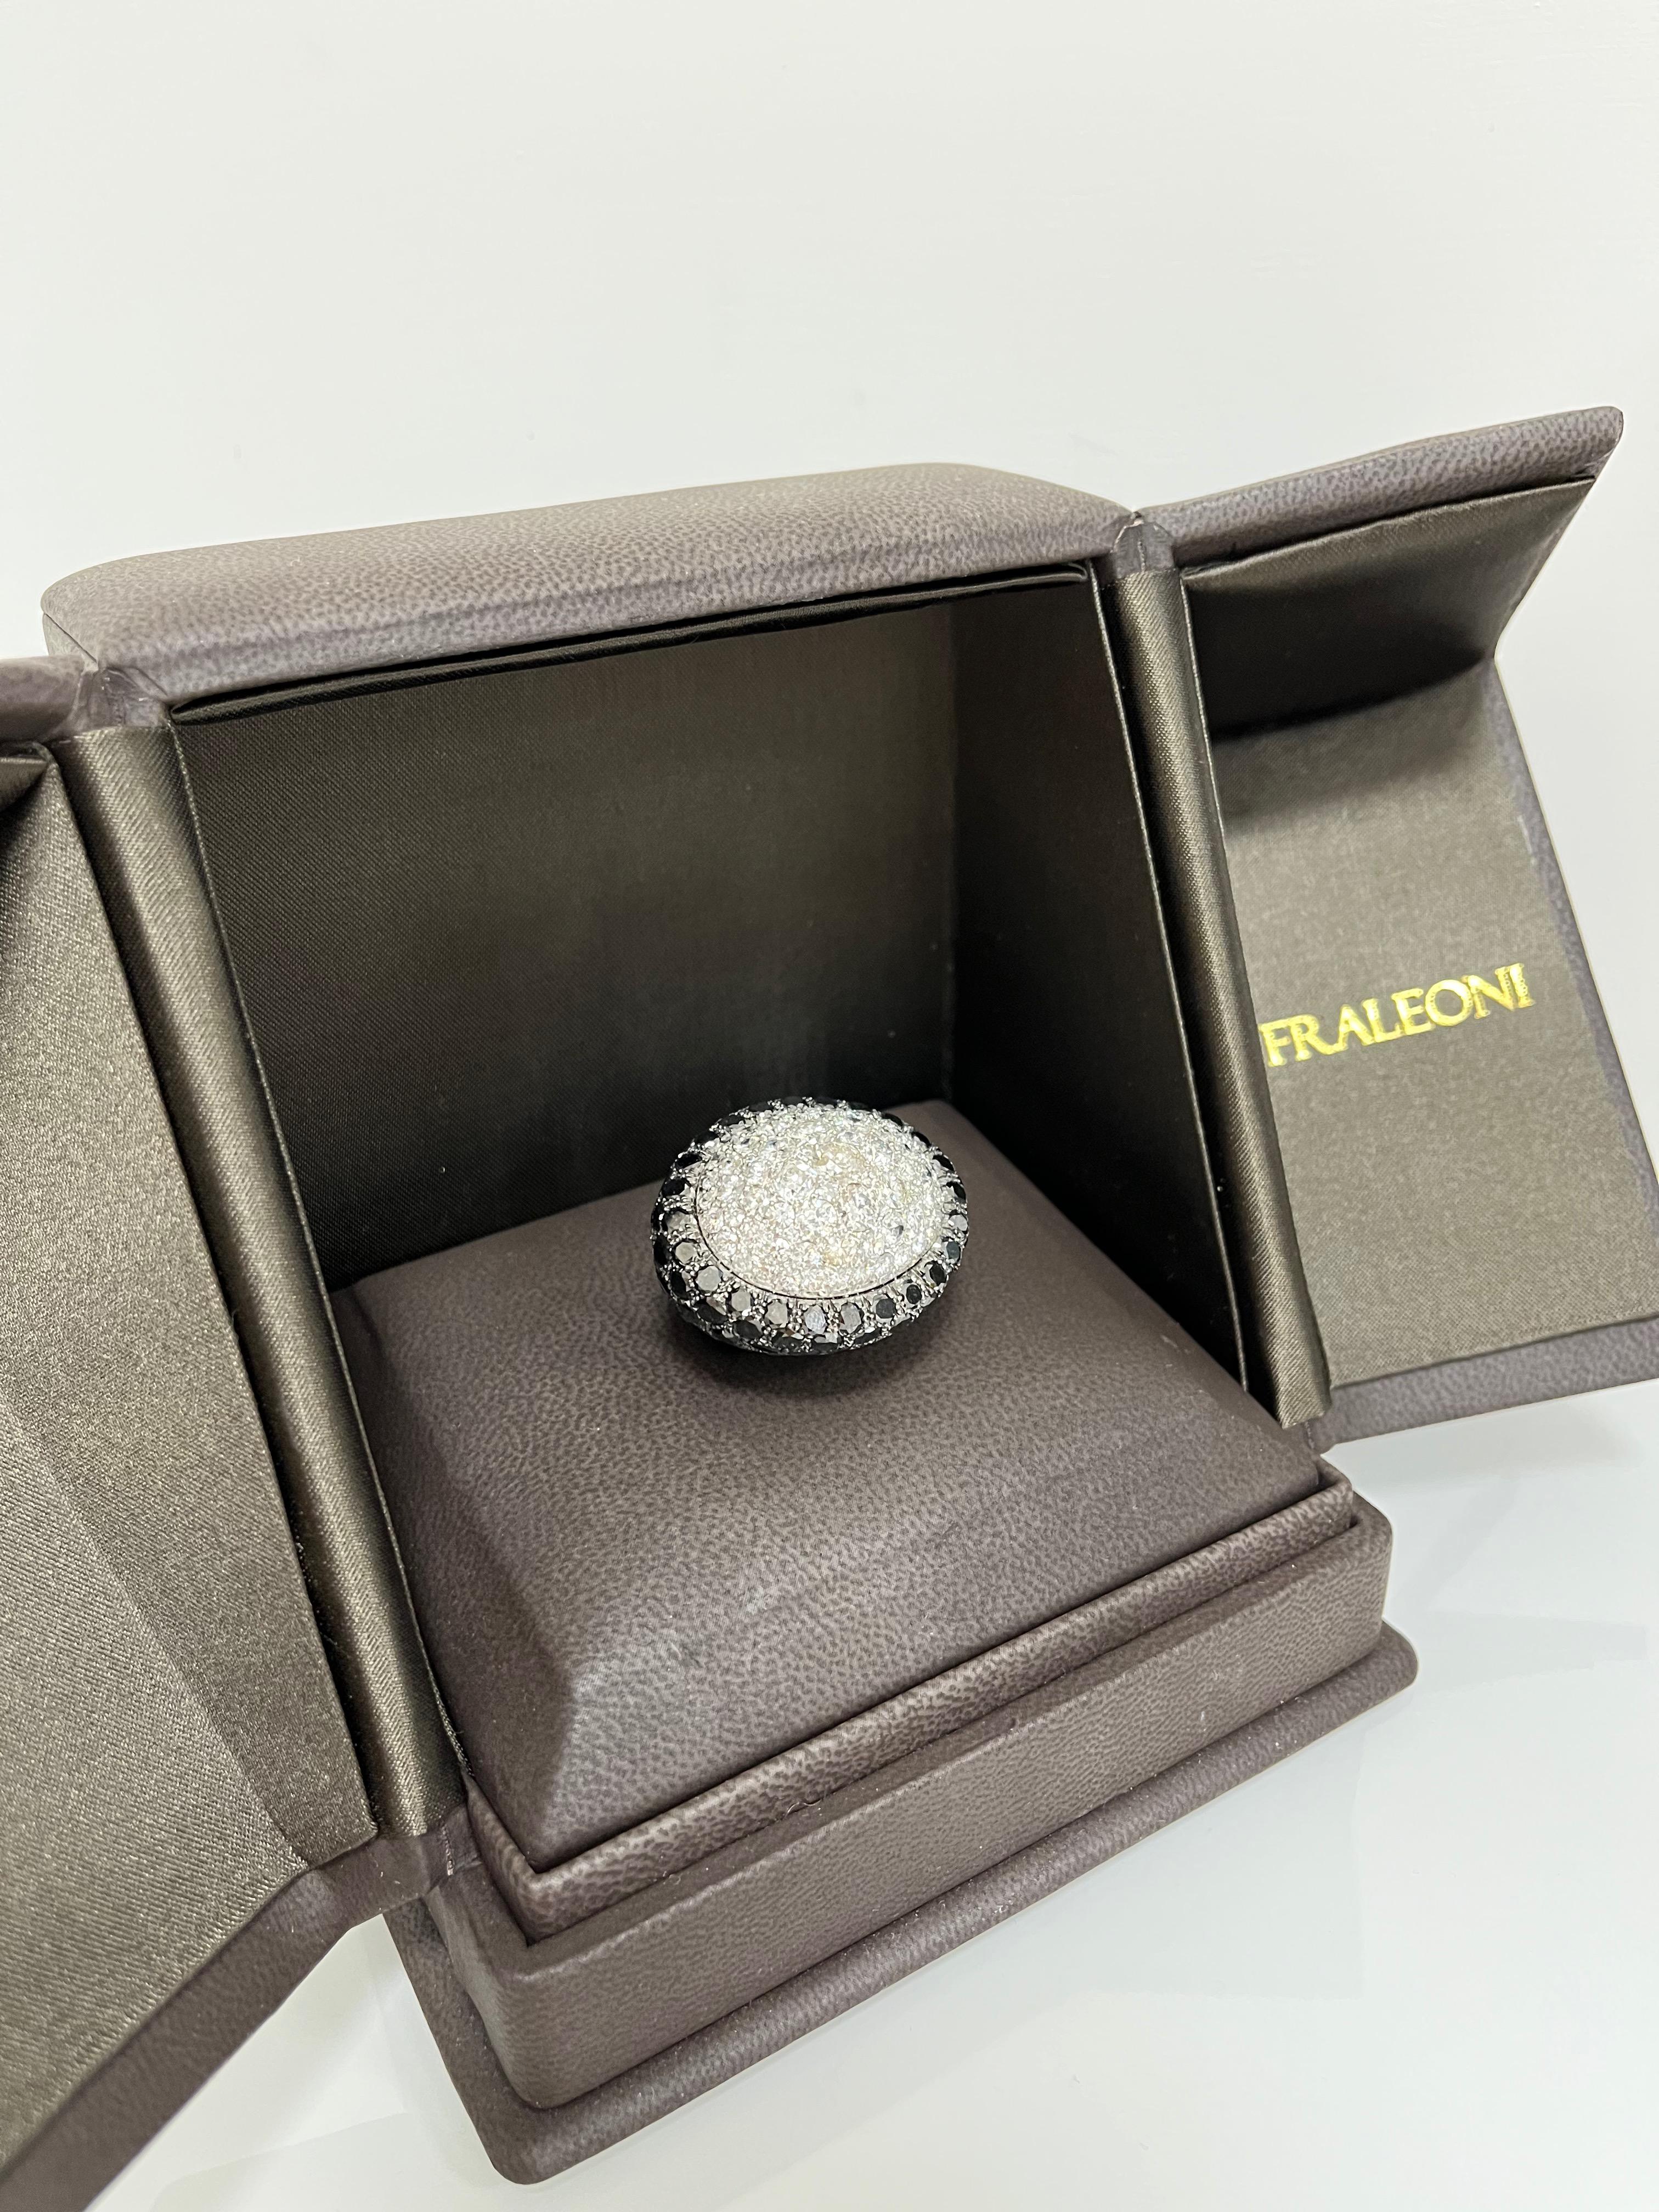 18 kt. white gold ring with round-cut diamonds and round-cut black diamonds.
This impressive cocktail ring is hand-made in Italy and signed by Fraleoni.
Fraleoni is an Italian brand, based in the centre of Rome.
The ring is shaped as an oval.
The